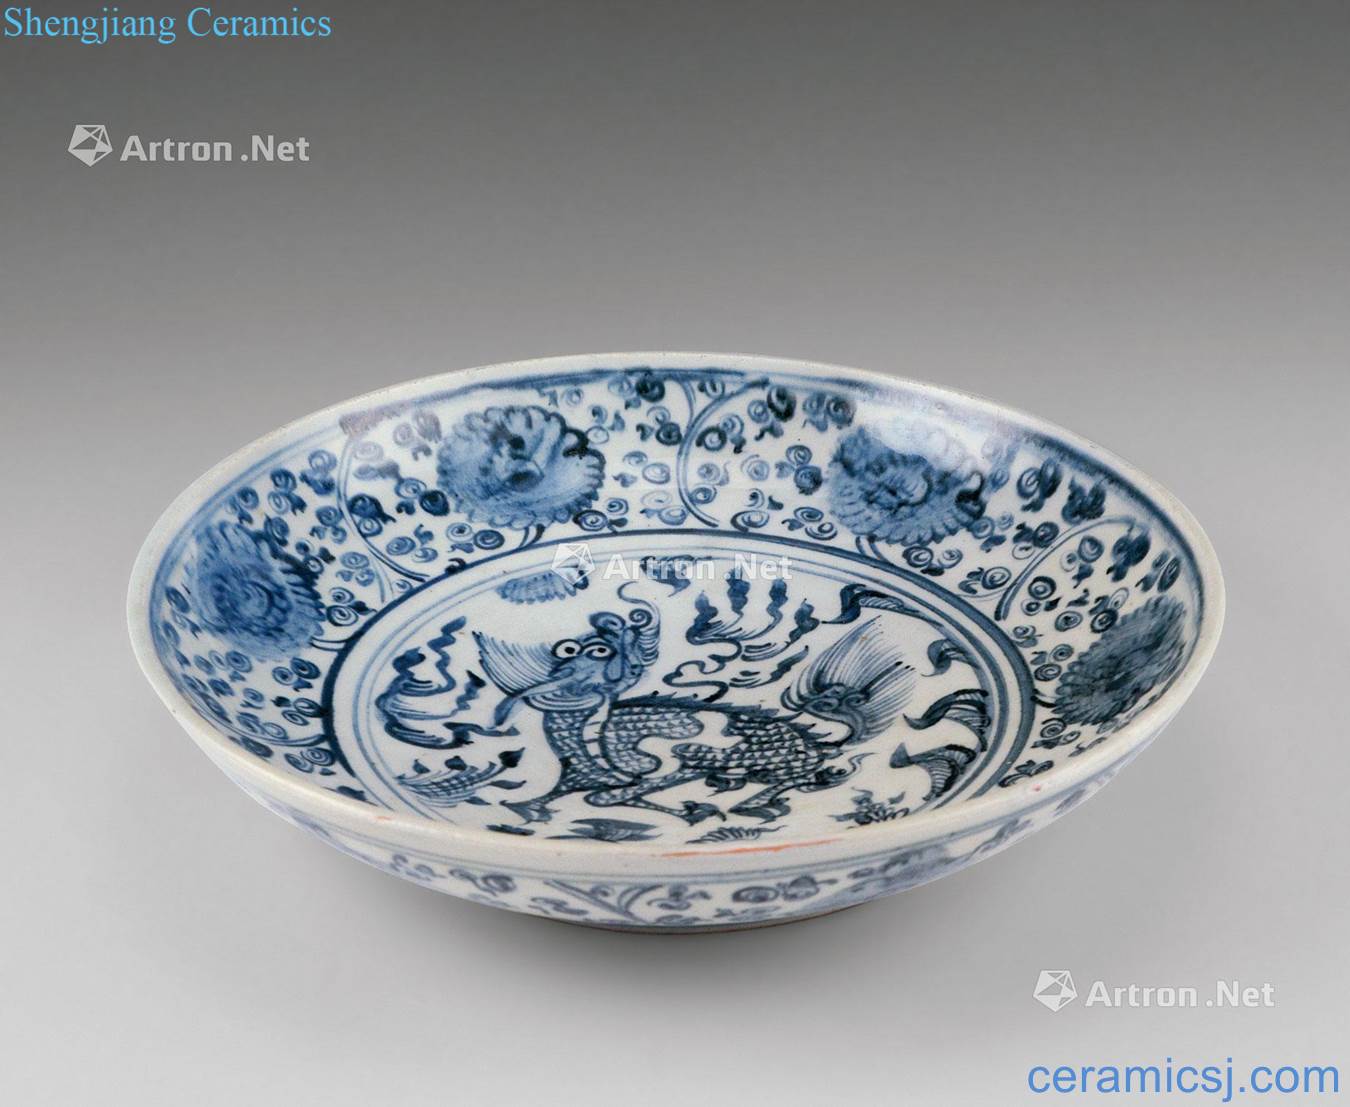 In the Ming dynasty (1368-1644) blue and white dragon